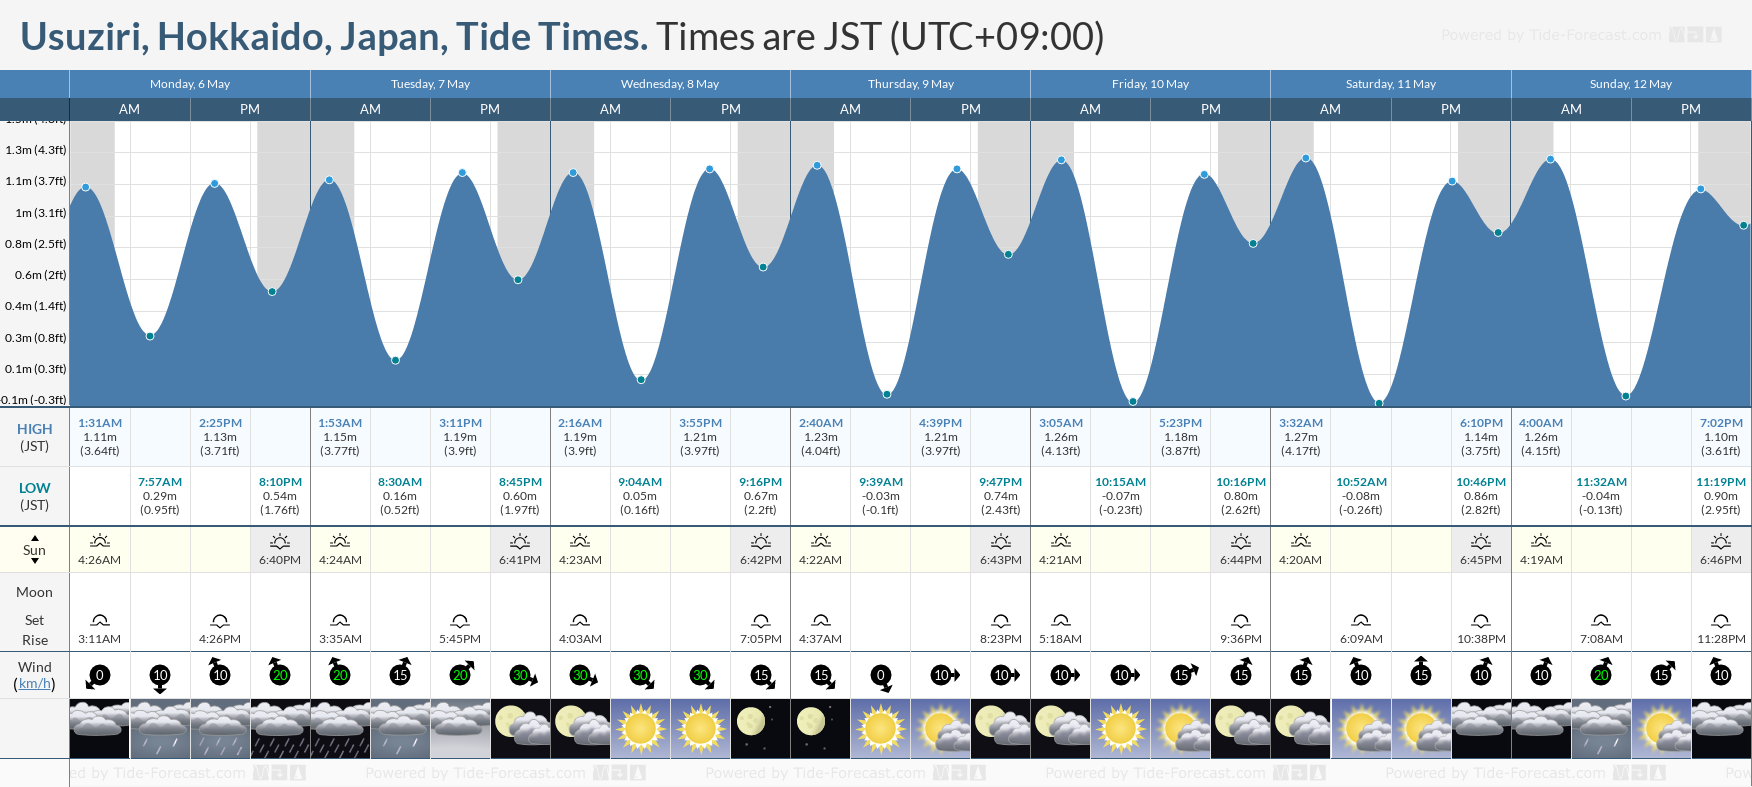 Usuziri, Hokkaido, Japan Tide Chart including high and low tide tide times for the next 7 days